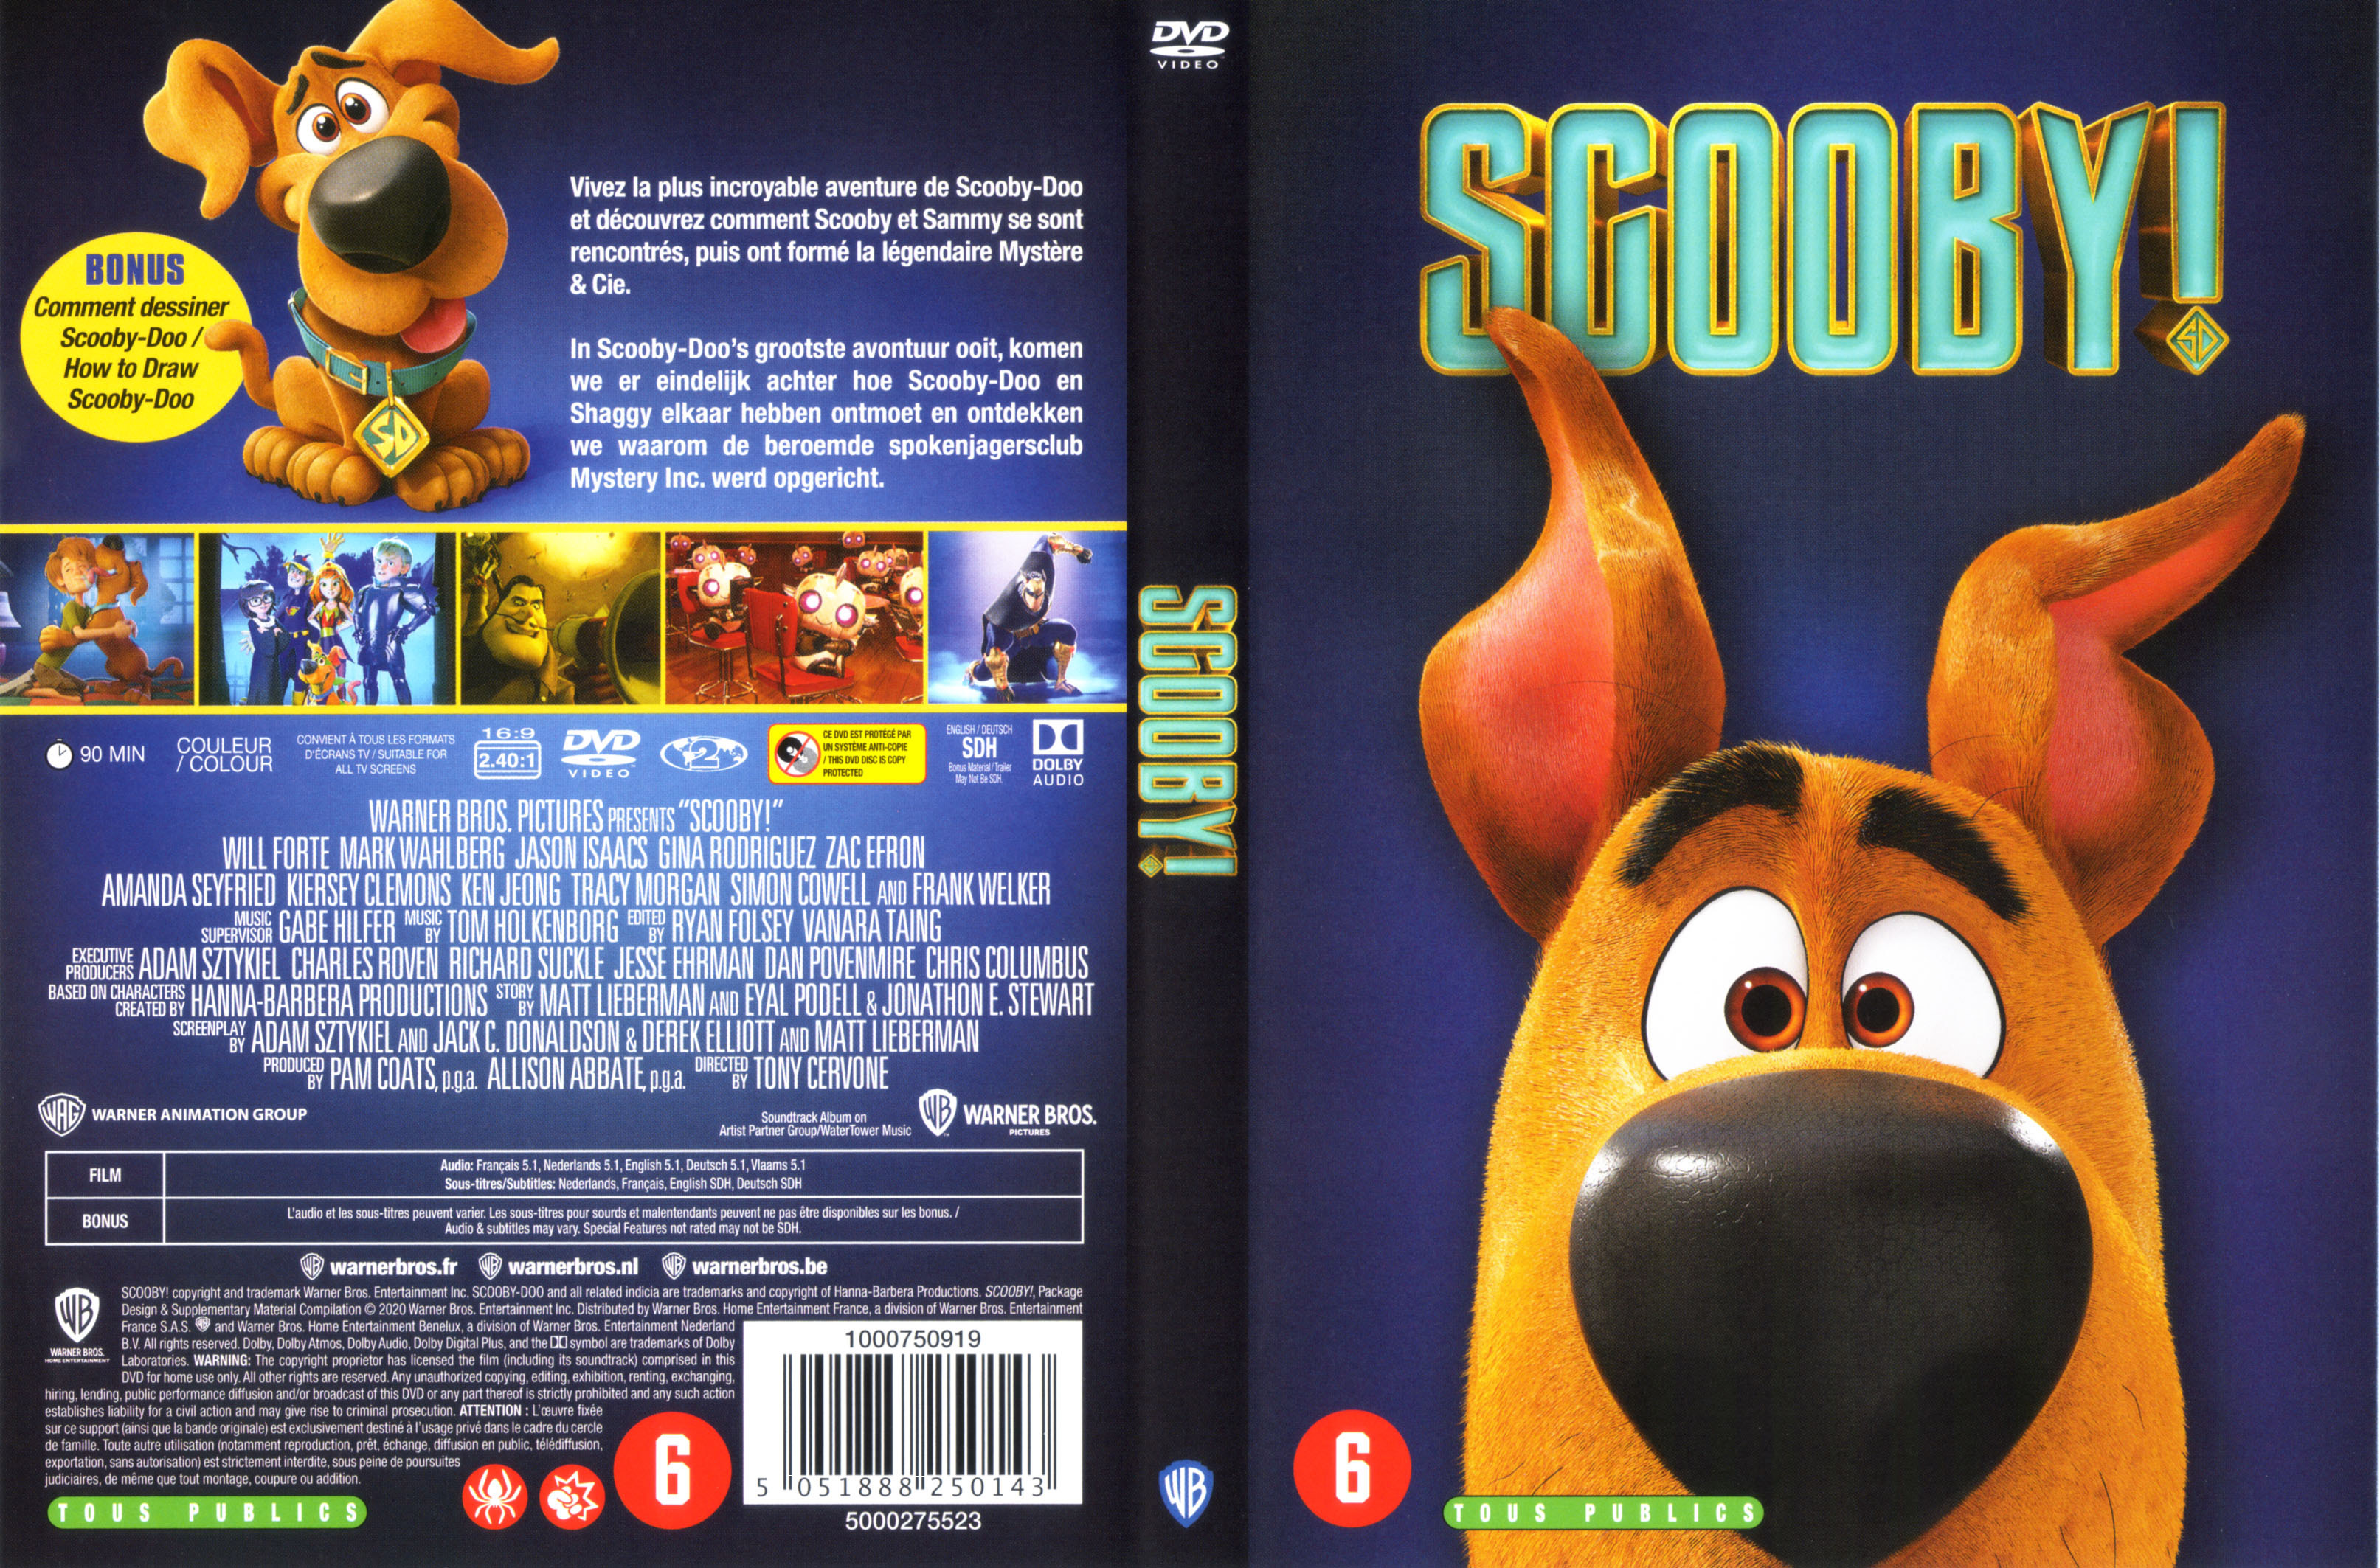 Jaquette DVD Scooby !